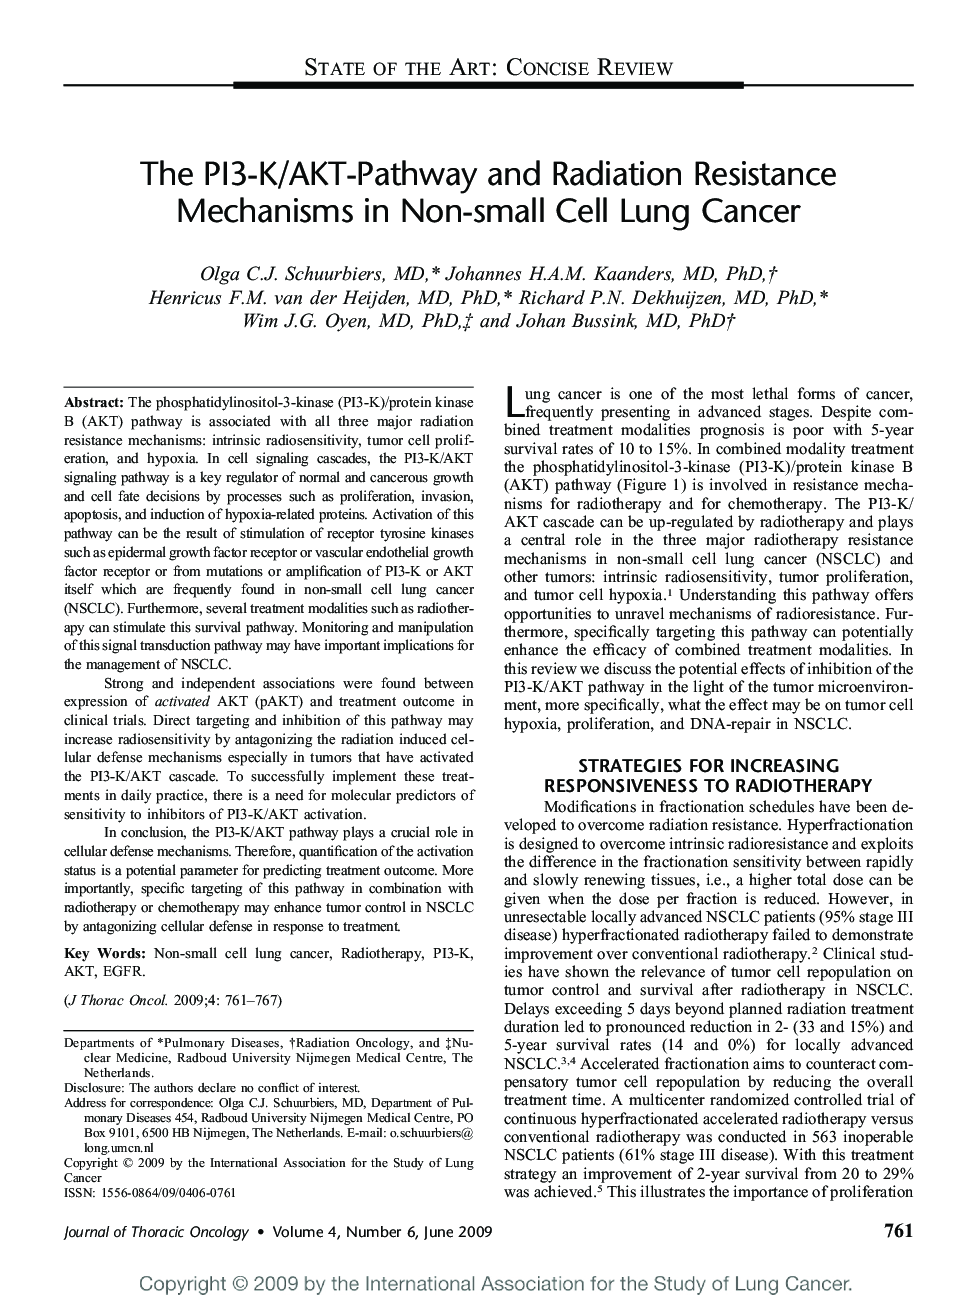 The PI3-K/AKT-Pathway and Radiation Resistance Mechanisms in Non-small Cell Lung Cancer 